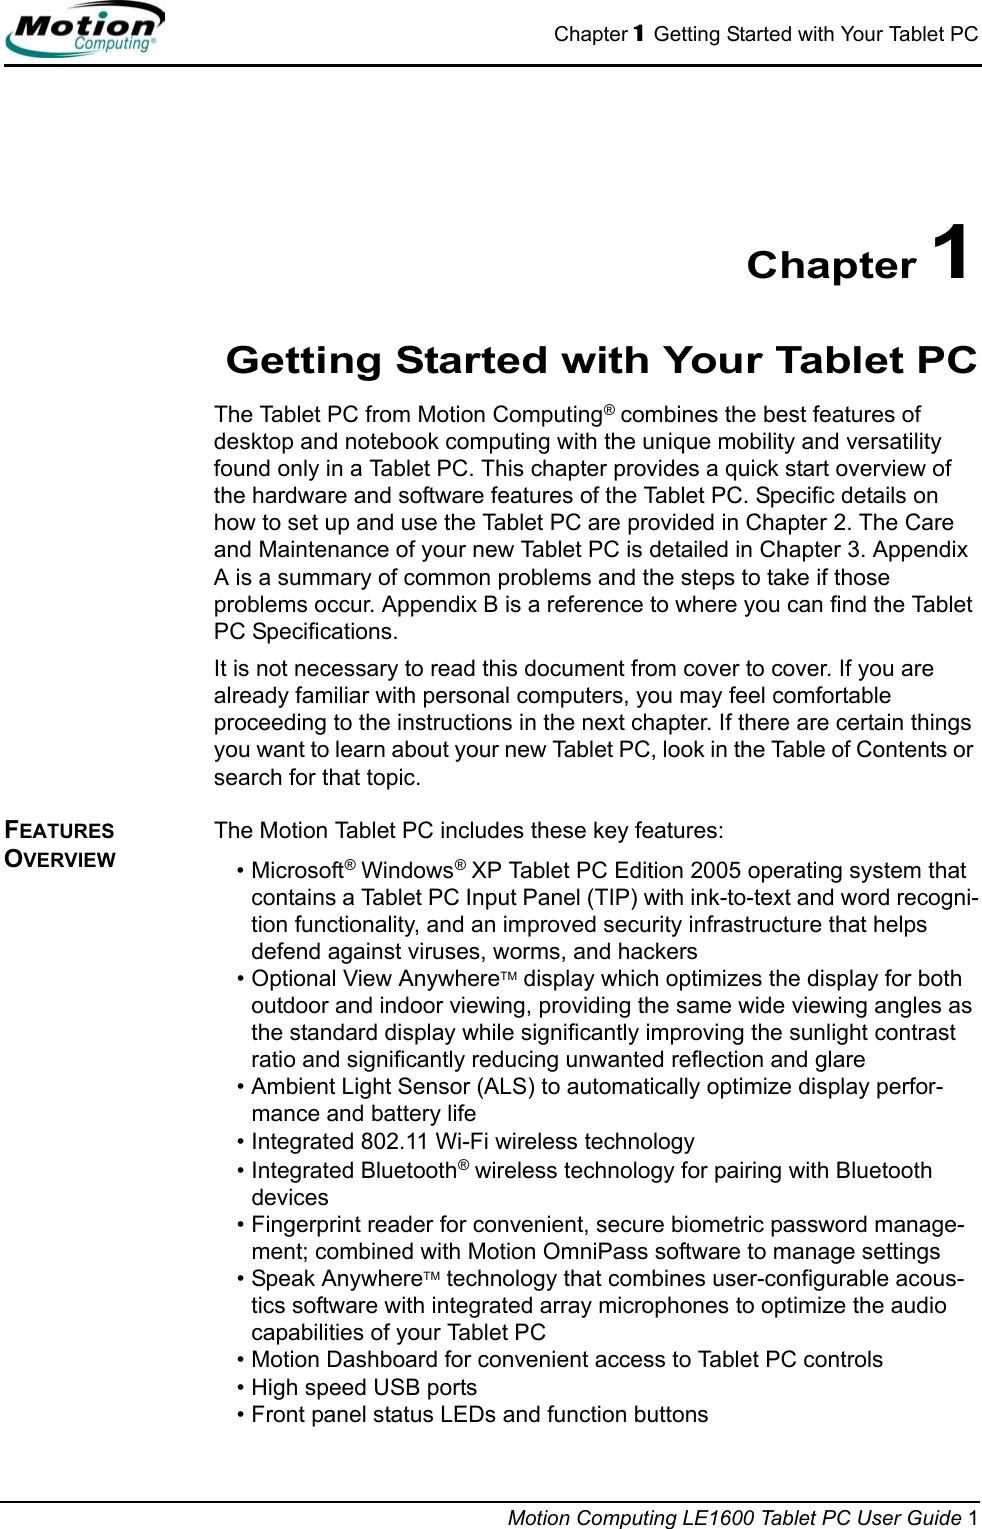 Chapter 1  Getting Started with Your Tablet PCMotion Computing LE1600 Tablet PC User Guide 1Chapter 1Getting Started with Your Tablet PCThe Tablet PC from Motion Computing® combines the best features of desktop and notebook computing with the unique mobility and versatility found only in a Tablet PC. This chapter provides a quick start overview of the hardware and software features of the Tablet PC. Specific details on how to set up and use the Tablet PC are provided in Chapter 2. The Care and Maintenance of your new Tablet PC is detailed in Chapter 3. Appendix A is a summary of common problems and the steps to take if those problems occur. Appendix B is a reference to where you can find the Tablet PC Specifications.It is not necessary to read this document from cover to cover. If you are already familiar with personal computers, you may feel comfortable proceeding to the instructions in the next chapter. If there are certain things you want to learn about your new Tablet PC, look in the Table of Contents or search for that topic.FEATURES OVERVIEWThe Motion Tablet PC includes these key features:•Microsoft® Windows® XP Tablet PC Edition 2005 operating system that contains a Tablet PC Input Panel (TIP) with ink-to-text and word recogni-tion functionality, and an improved security infrastructure that helps defend against viruses, worms, and hackers• Optional View AnywhereTM display which optimizes the display for both outdoor and indoor viewing, providing the same wide viewing angles as the standard display while significantly improving the sunlight contrast ratio and significantly reducing unwanted reflection and glare• Ambient Light Sensor (ALS) to automatically optimize display perfor-mance and battery life• Integrated 802.11 Wi-Fi wireless technology• Integrated Bluetooth® wireless technology for pairing with Bluetooth devices• Fingerprint reader for convenient, secure biometric password manage-ment; combined with Motion OmniPass software to manage settings• Speak AnywhereTM technology that combines user-configurable acous-tics software with integrated array microphones to optimize the audio capabilities of your Tablet PC• Motion Dashboard for convenient access to Tablet PC controls• High speed USB ports • Front panel status LEDs and function buttons 